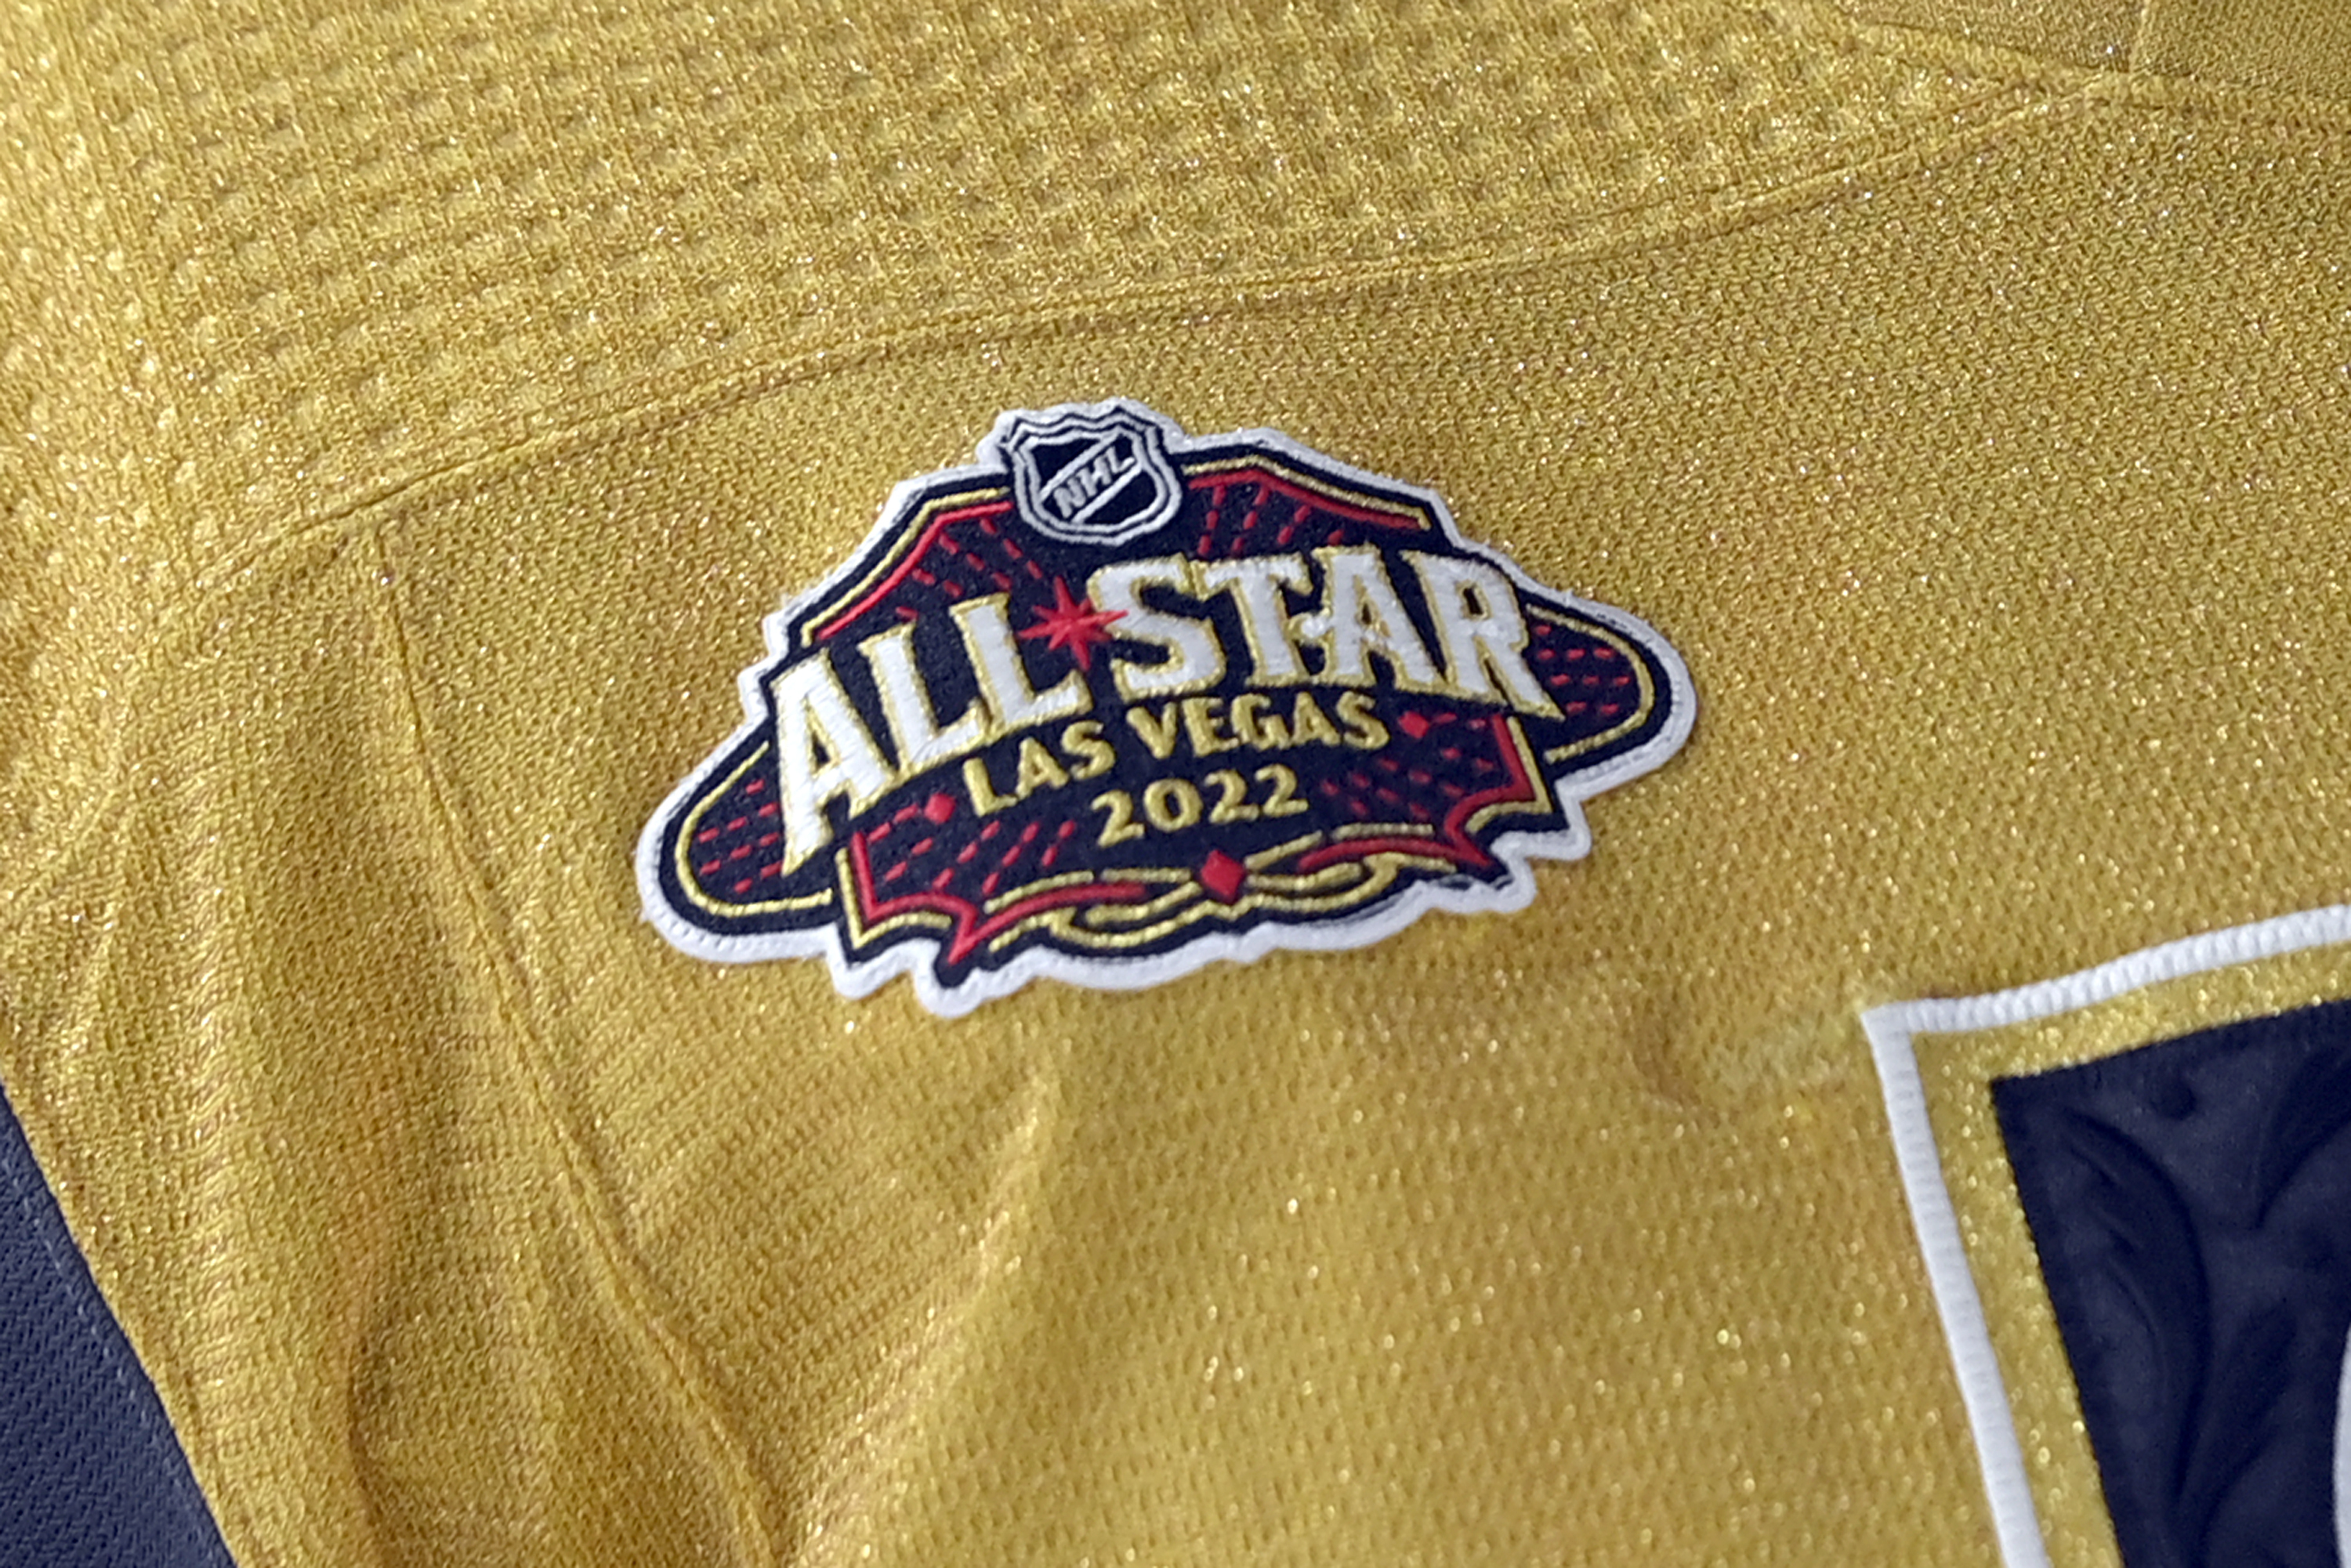 How to watch 2023 NHL All-Star skills competition (2/3/23): Free